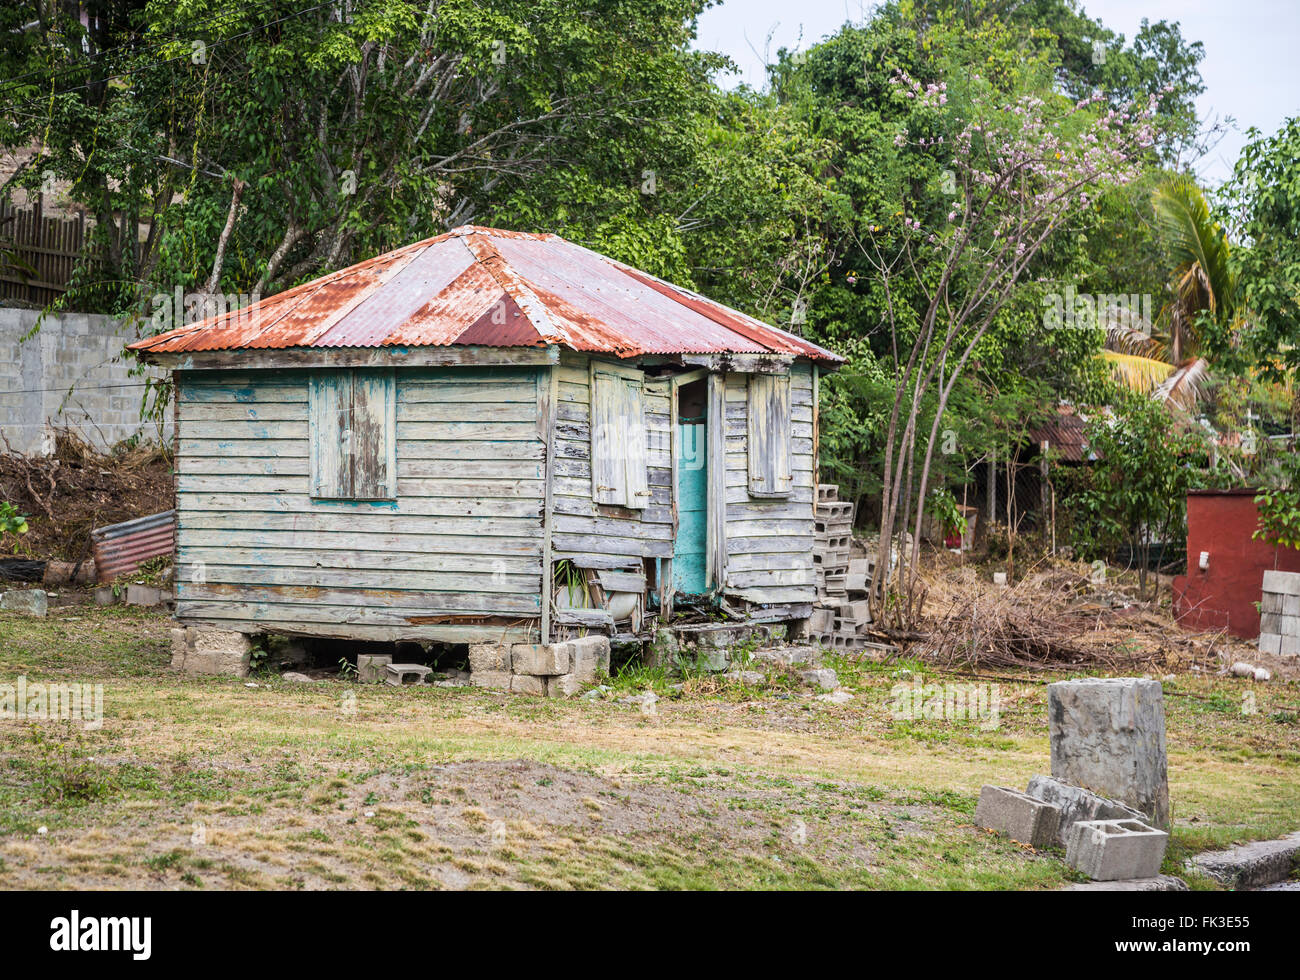 Typical run-down, boarded up, dilapidated wooden house in Liberta, south Antigua, Antigua and Barbuda, West Indies Stock Photo